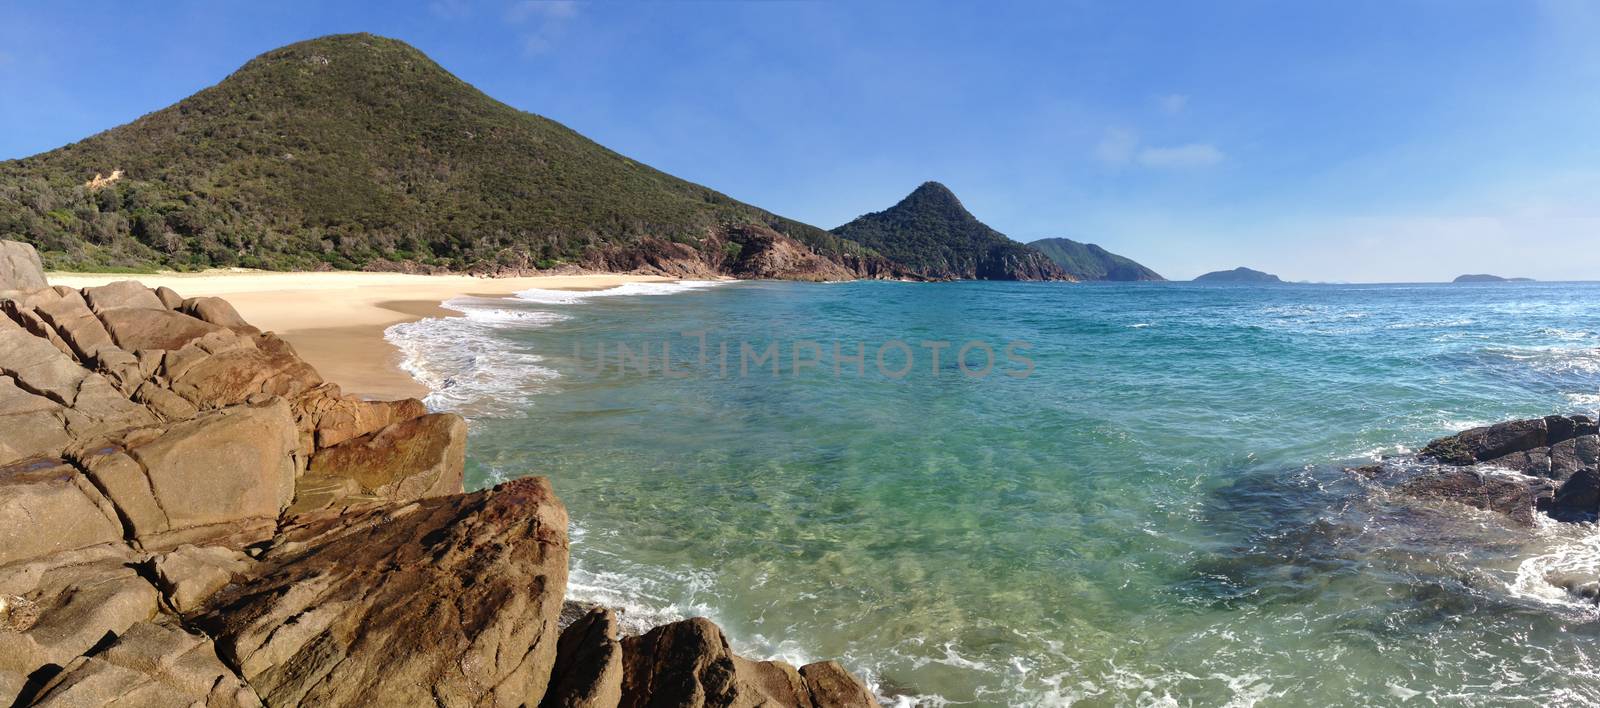 Wreck Beach in Port Stephens is part of the Tomaree National Park and can only be accessed by a walking track.